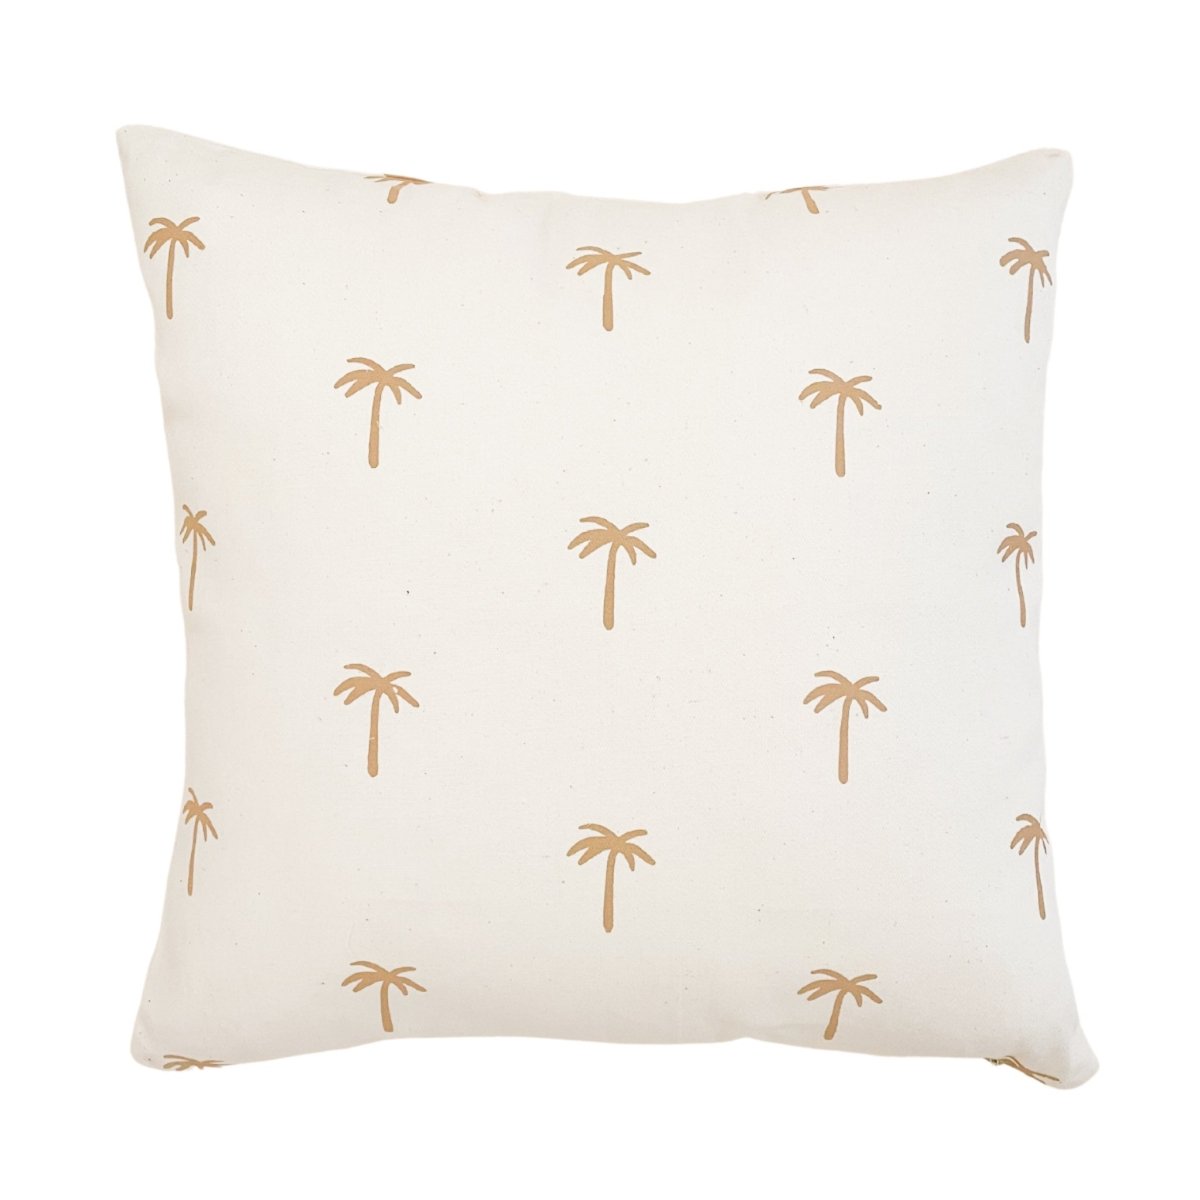 Imani Collective Palm Tree Pillow Cover - lily & onyx